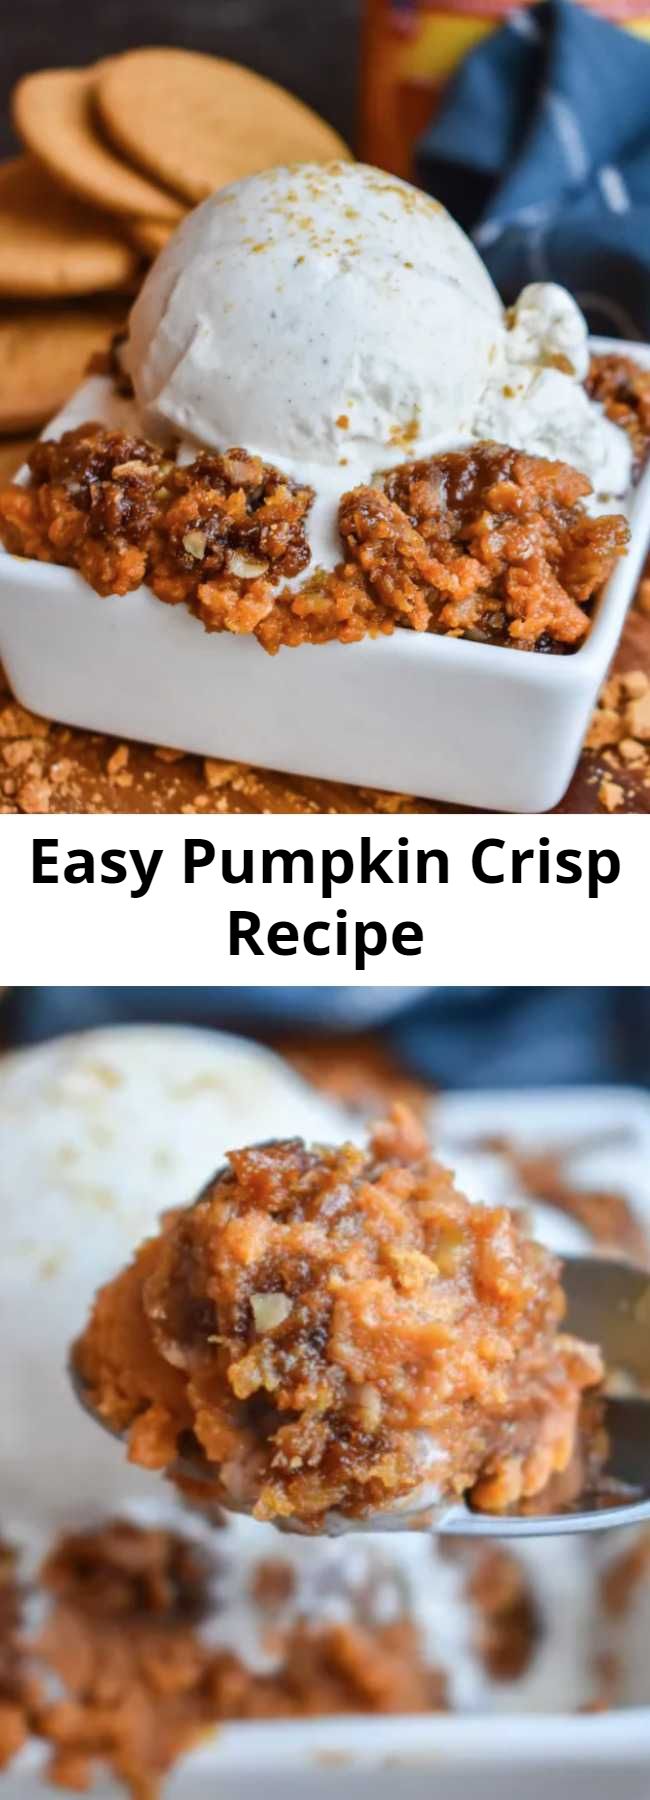 Easy Pumpkin Crisp Recipe - It’ll take about 1 bite of this goodness to realize Pumpkin Crisp is your new favorite fall dessert! The smooth, perfectly spiced pumpkin filling and the crunchy topping is truly a match made in heaven!! #Pumpkin #PumpkinCrisp #ALaMode #GingersnapCookies #Crisp